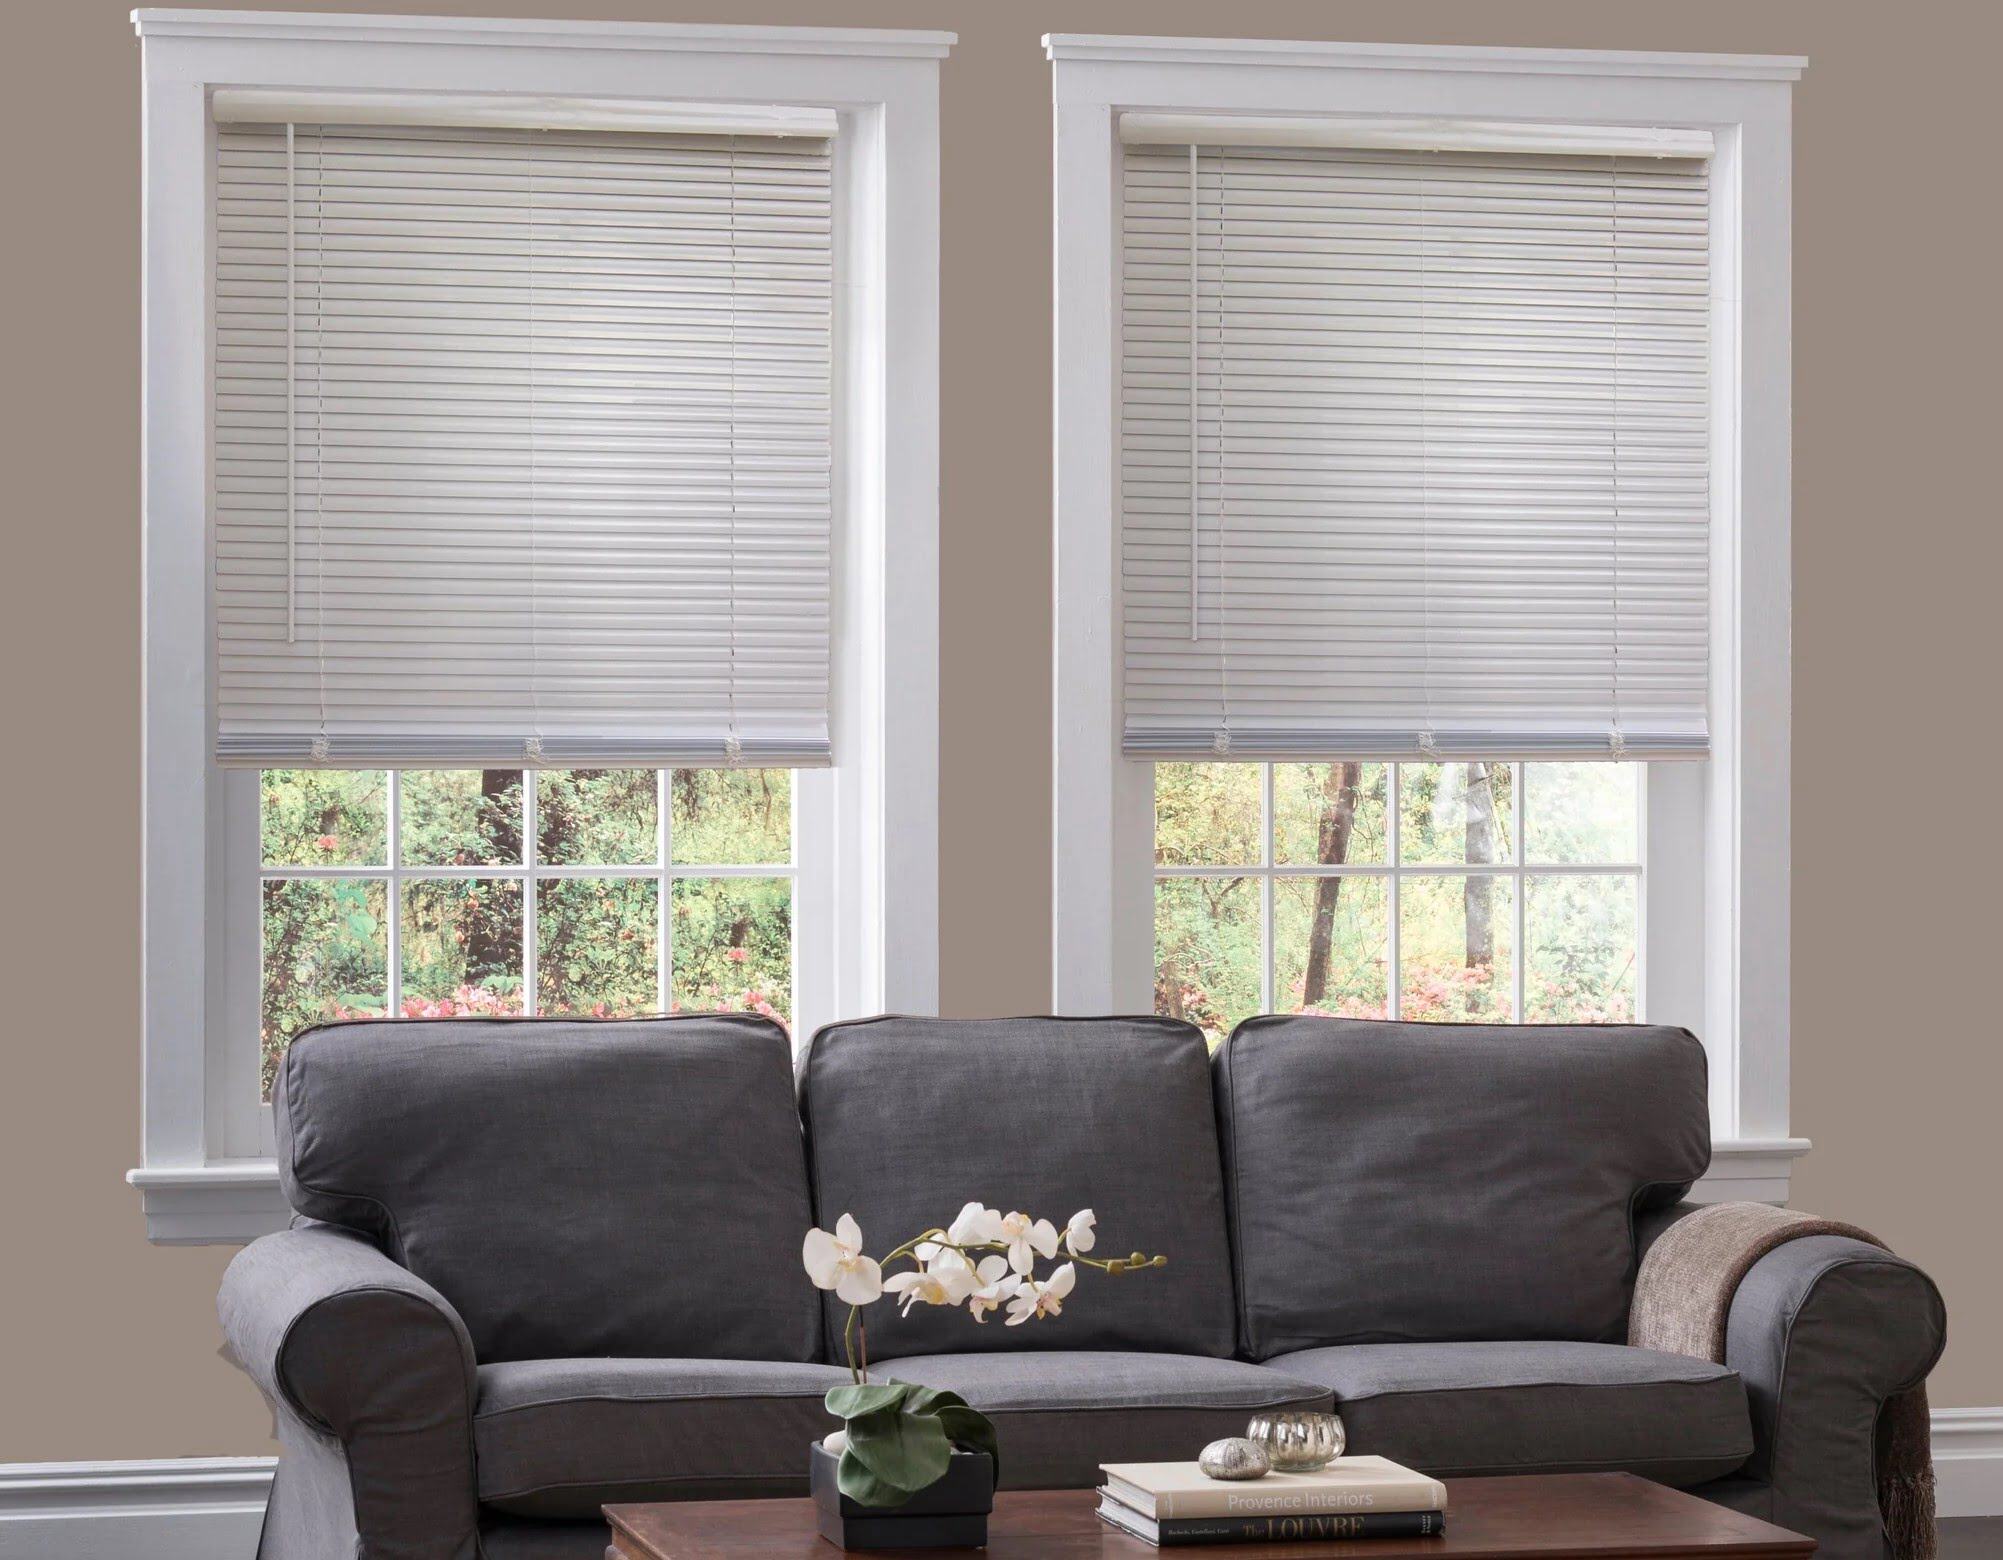 How To Install Cordless Mini Window Blinds